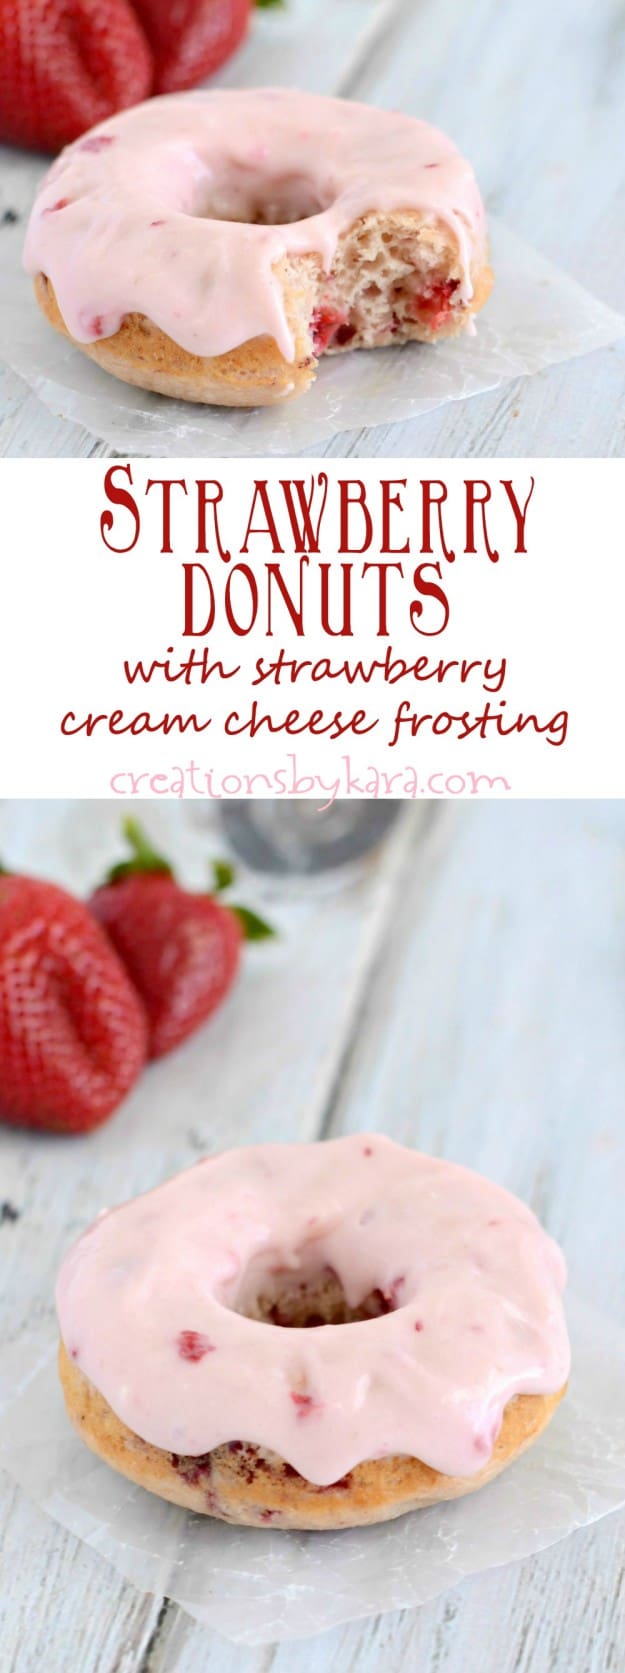 strawberry donuts with strawberry cream cheese frosting recipe collage